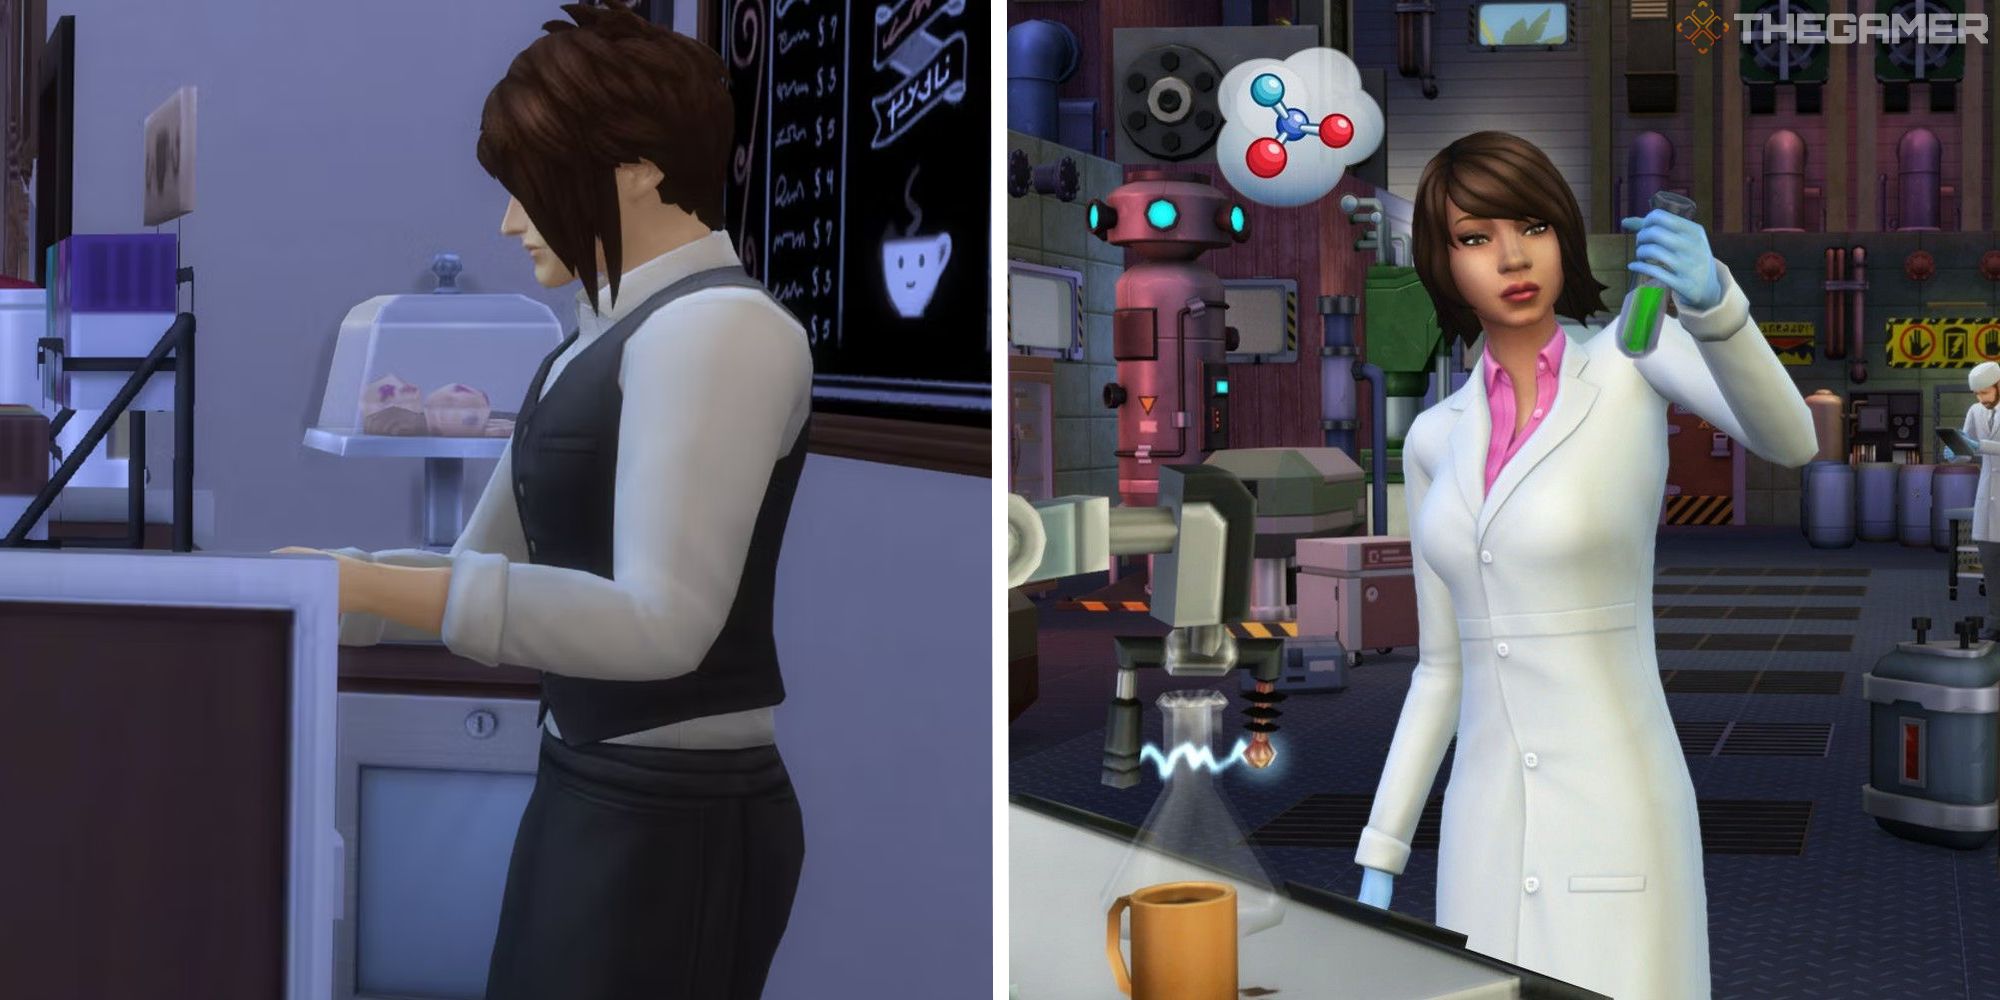 How To Deal With Rivals, Burnout, and Layoffs In The Sims 4